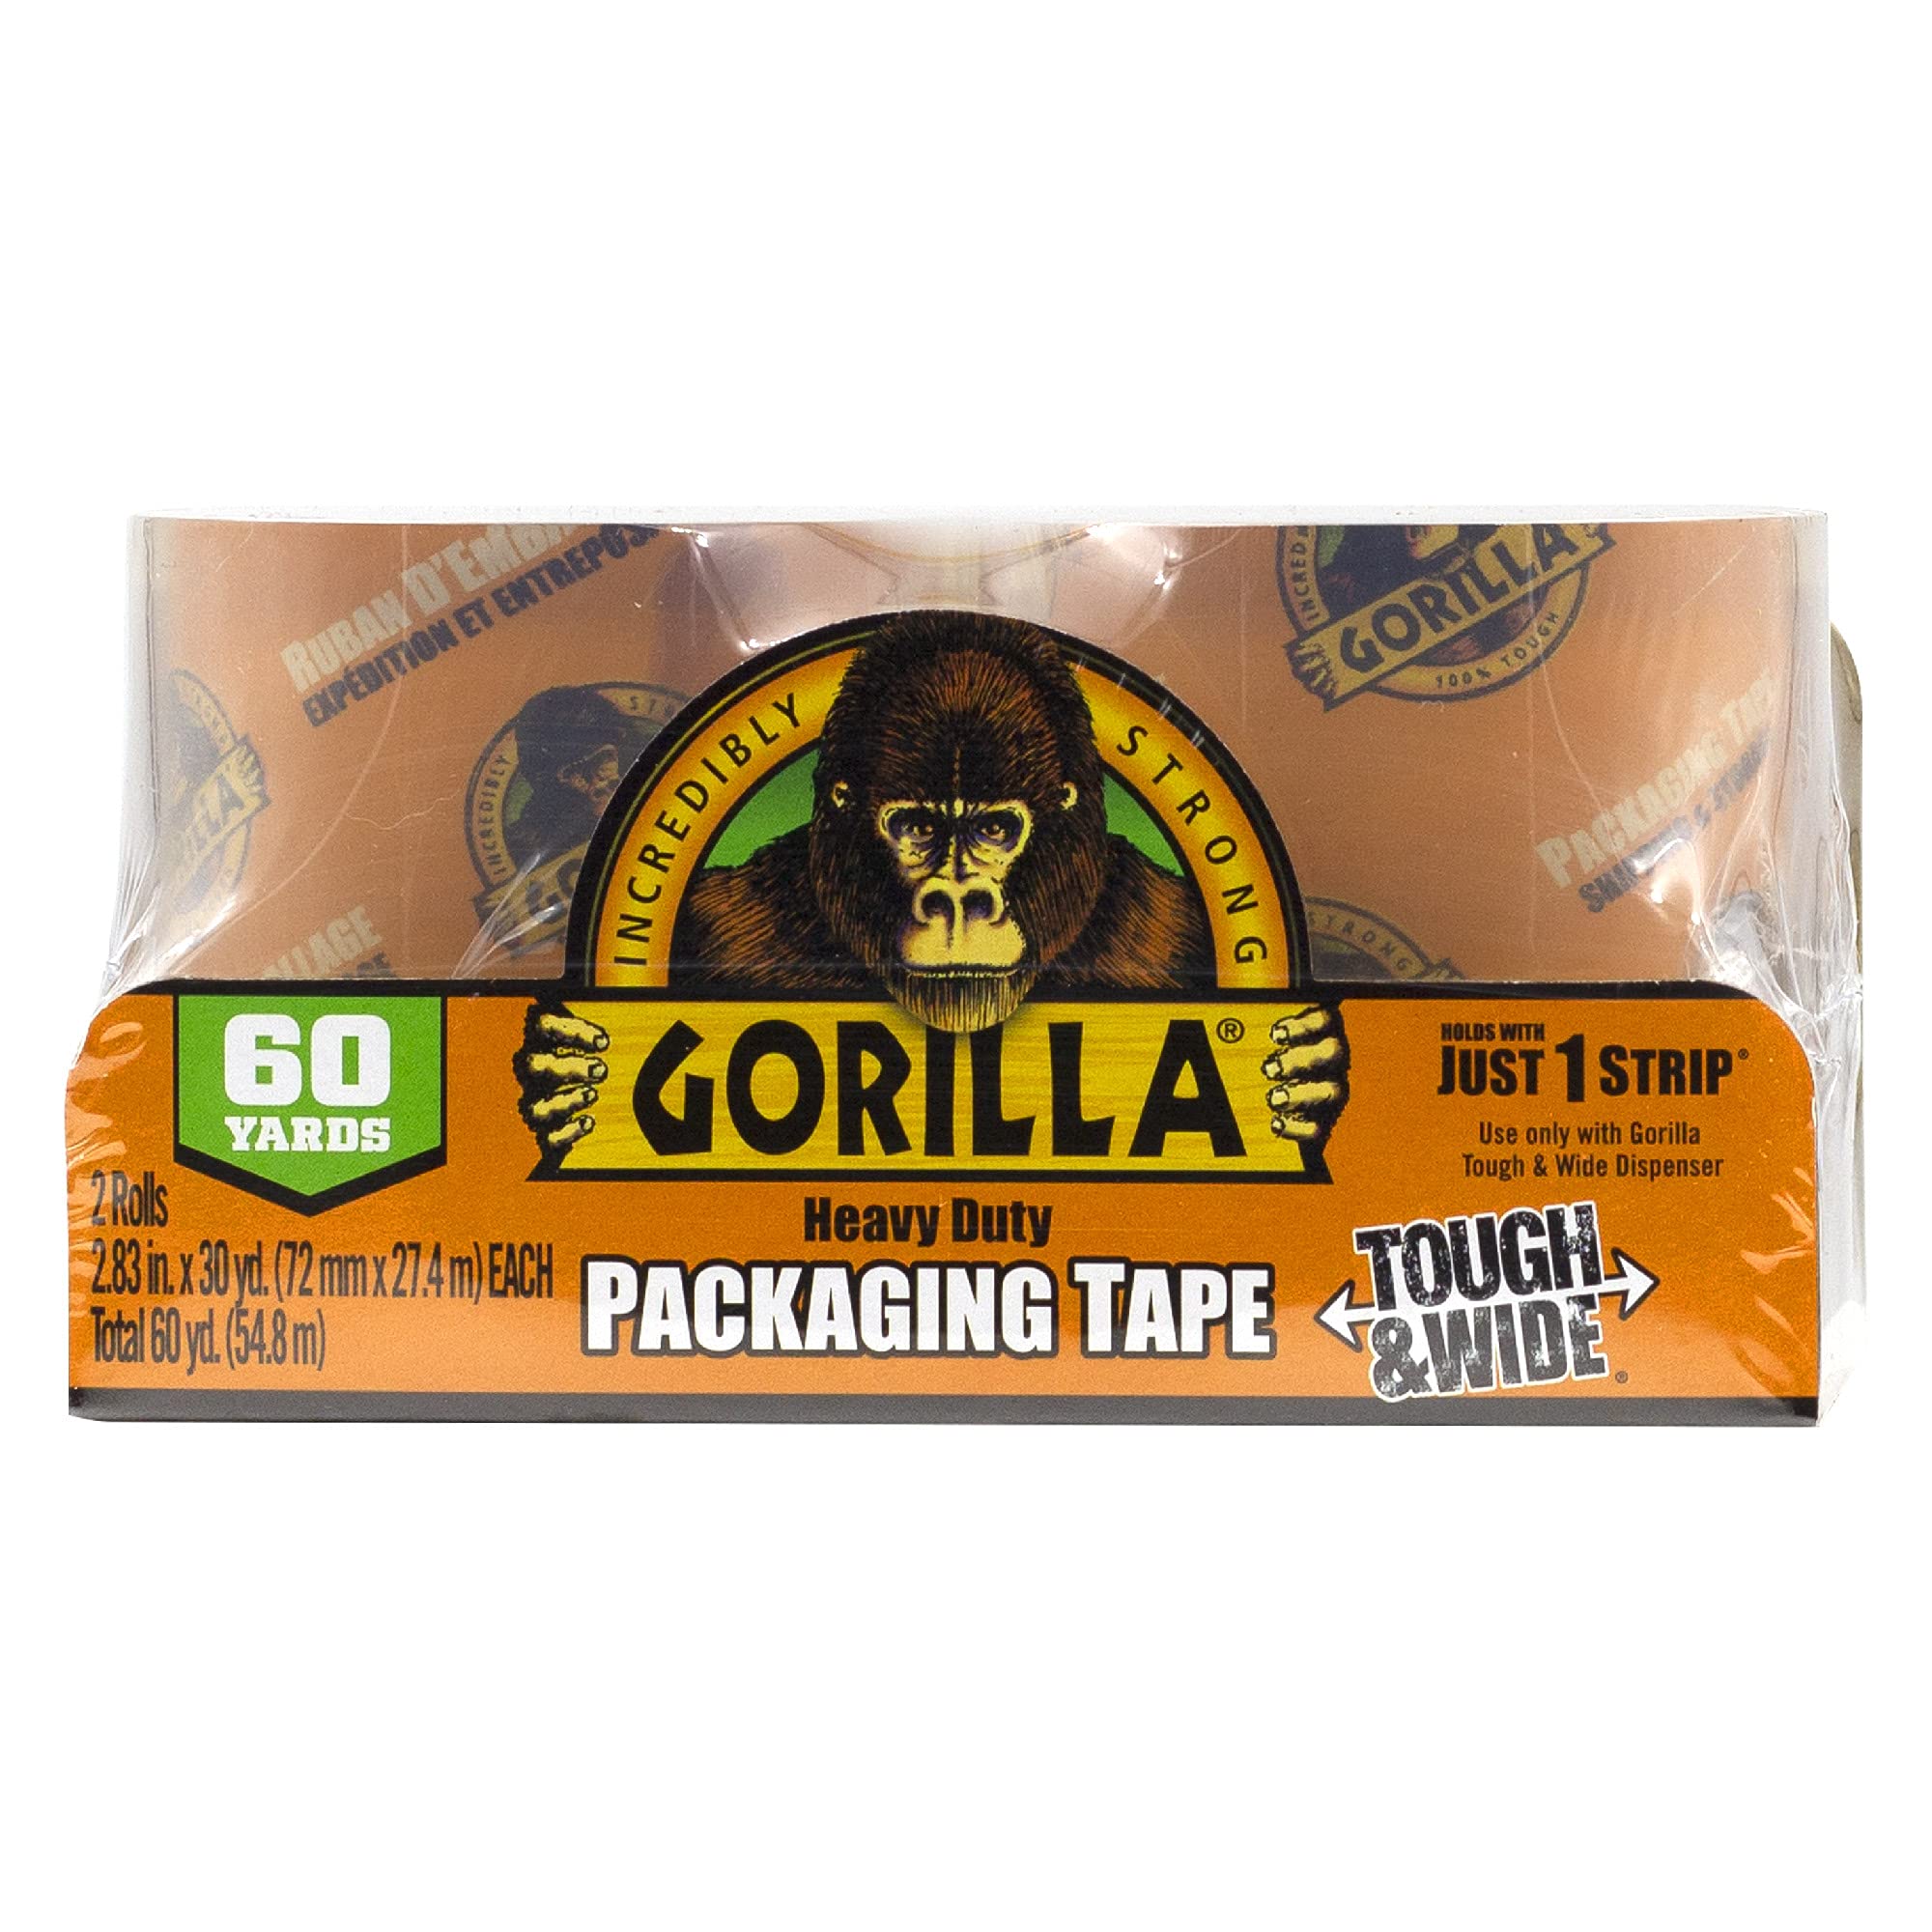 Gorilla Packing Tape Tough & Wide for Moving, Shipping, Storage, 2.83" x 30 yds 2-Pack $8 Shipped Amazon Prime